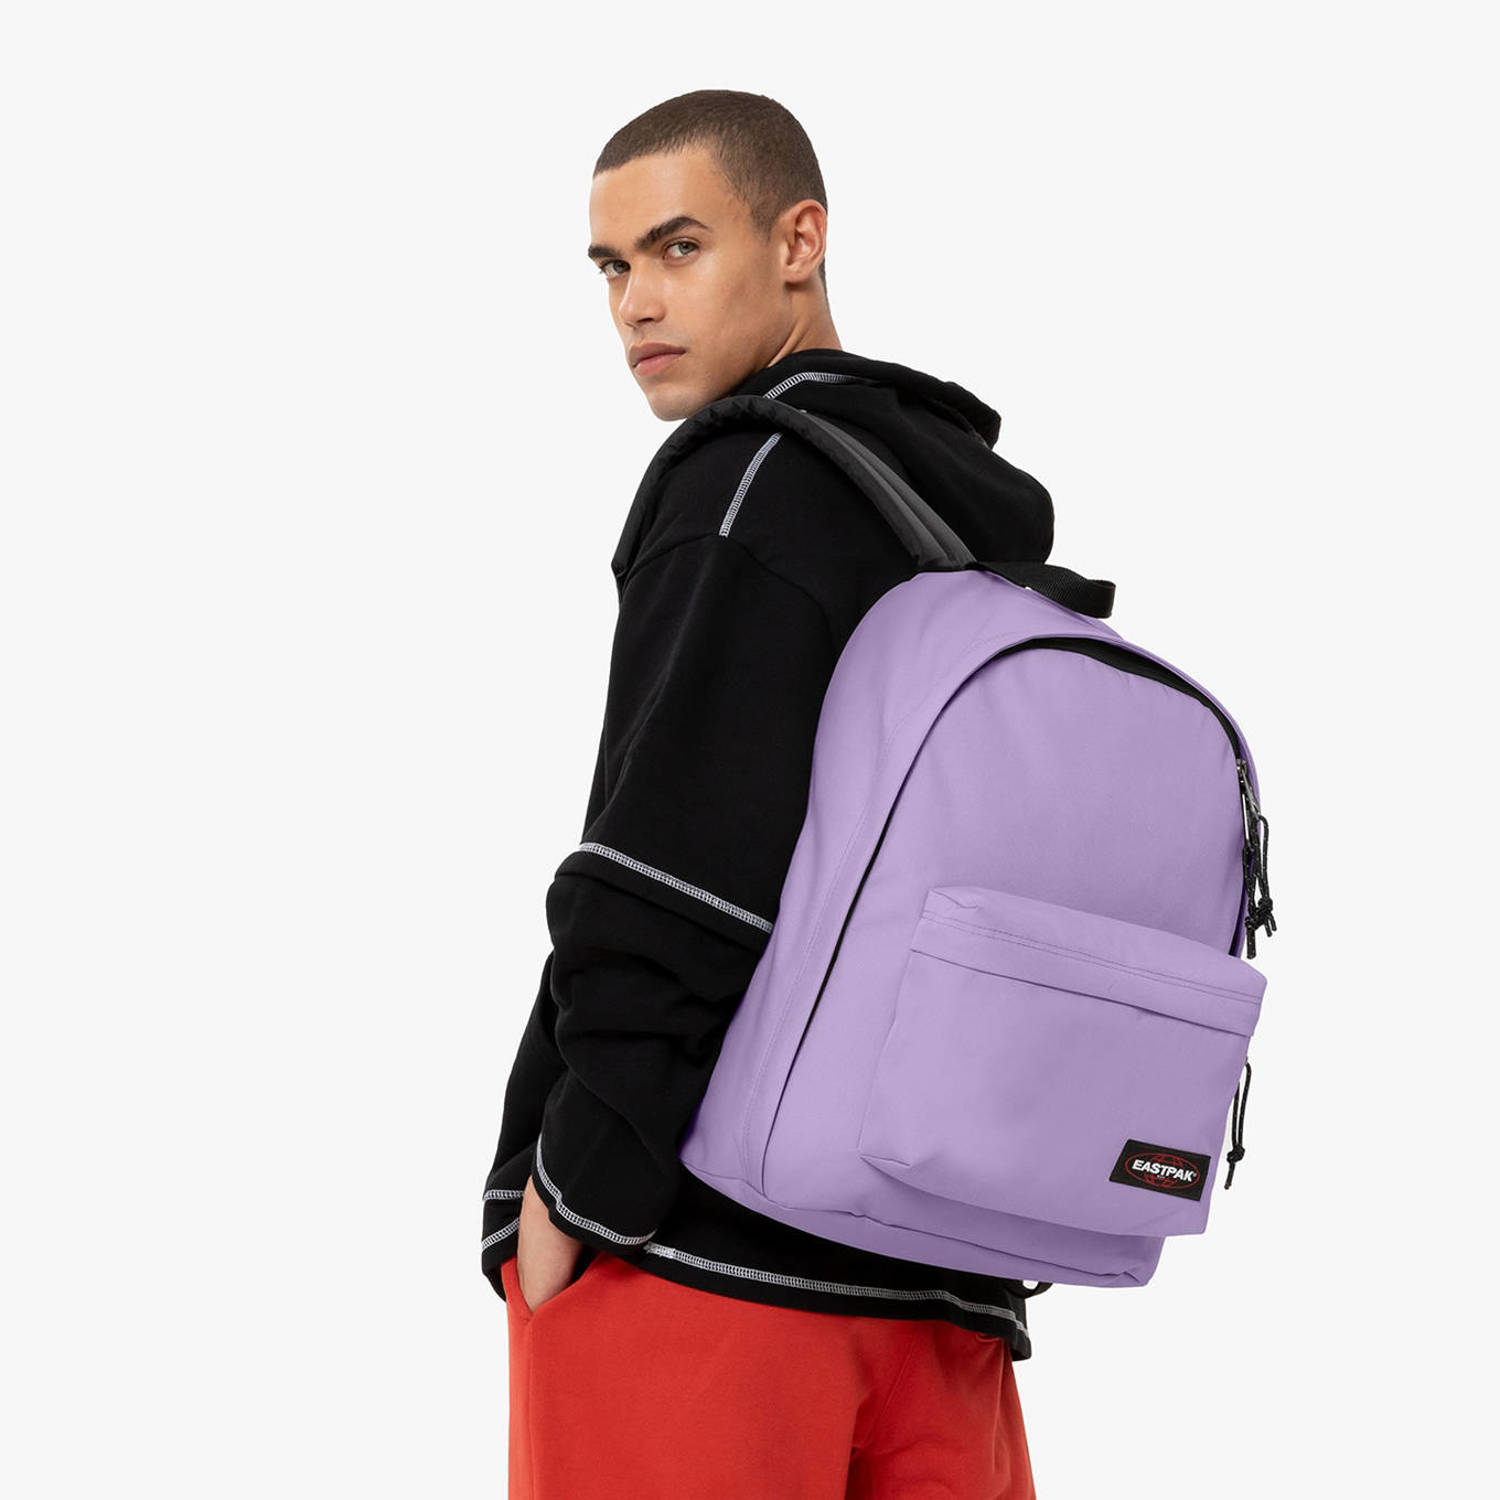 Eastpak rugzak Out of Office lavender lilac